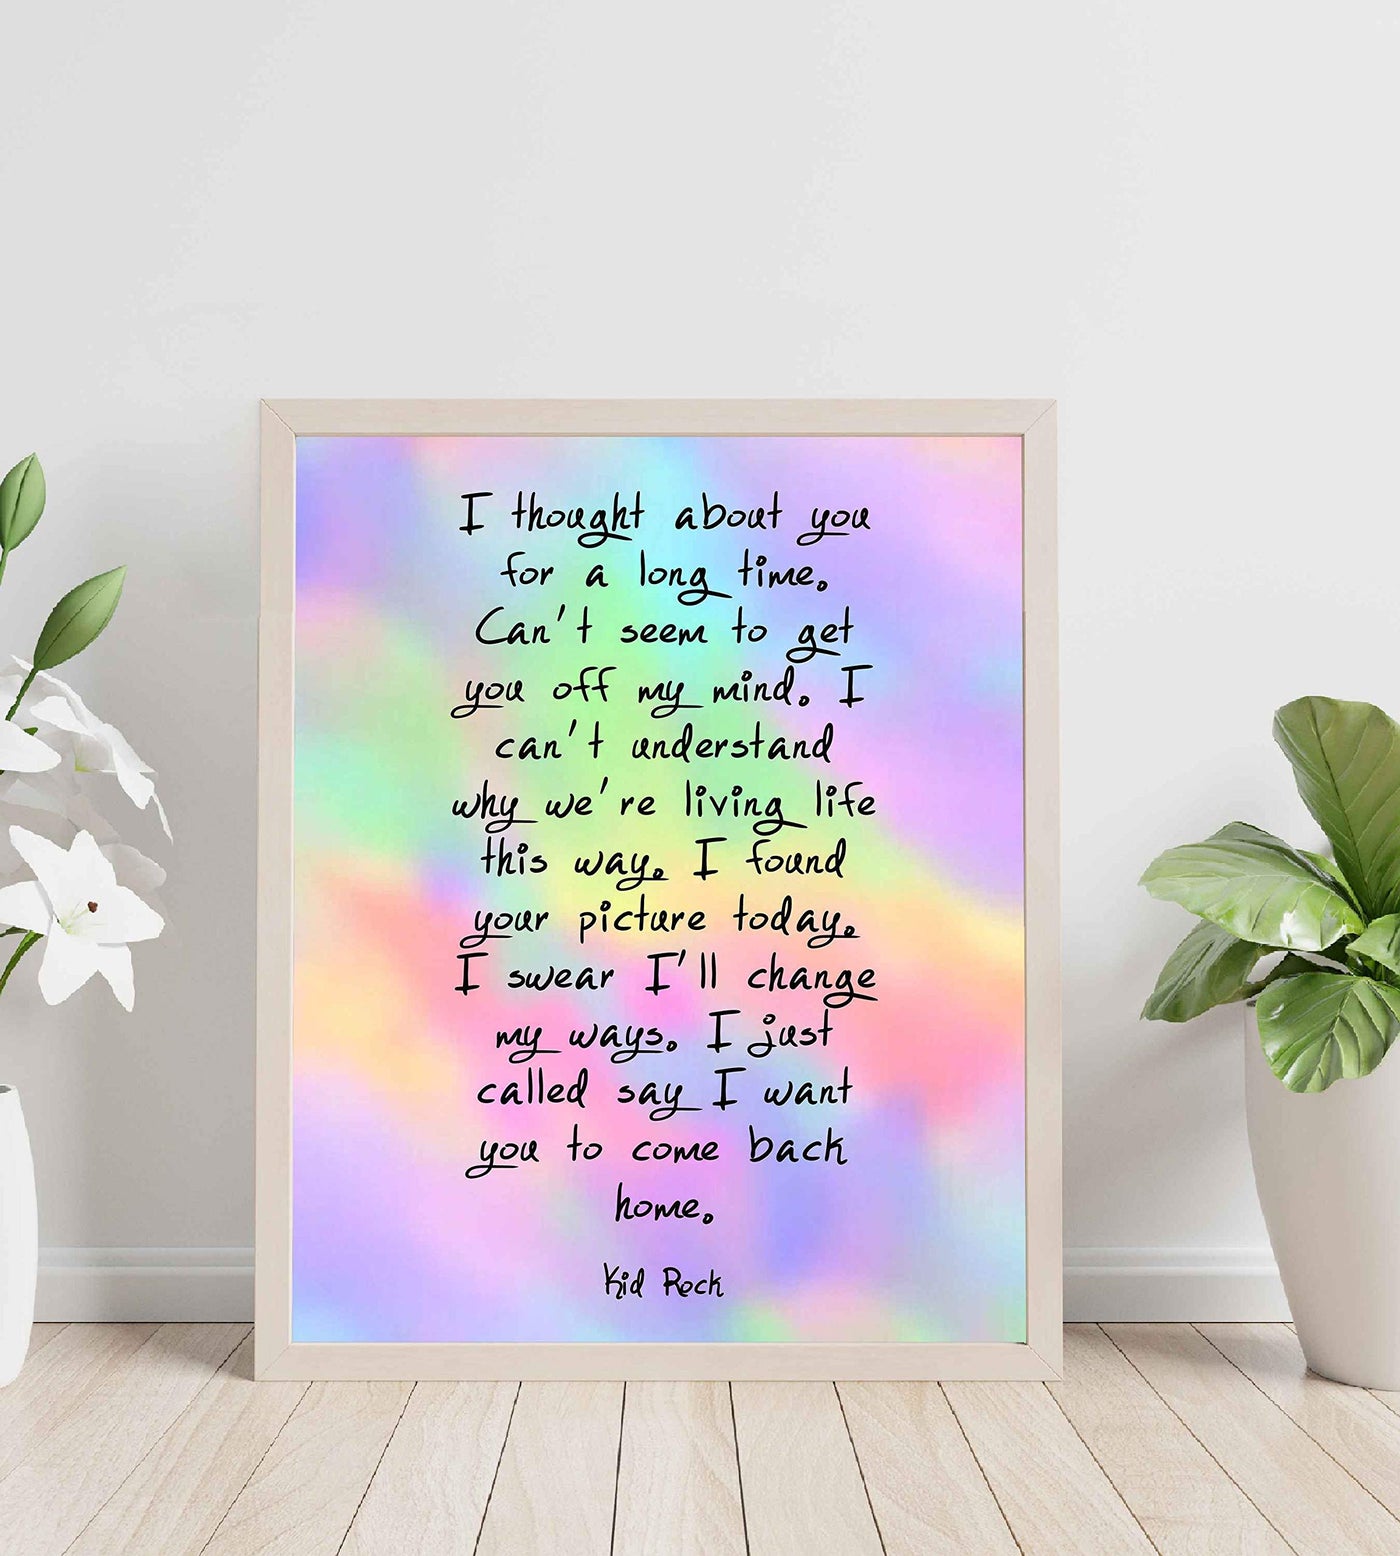 Kid Rock & Sheryl Crow-"Picture" Song Lyrics Wall Art Sign -8 x 10" Rock Music Poster Print-Ready to Frame. Greatest Hits Album Songs. Perfect Home-Studio-Bar-Fan Decor. Great Gift to Rekindle Love!